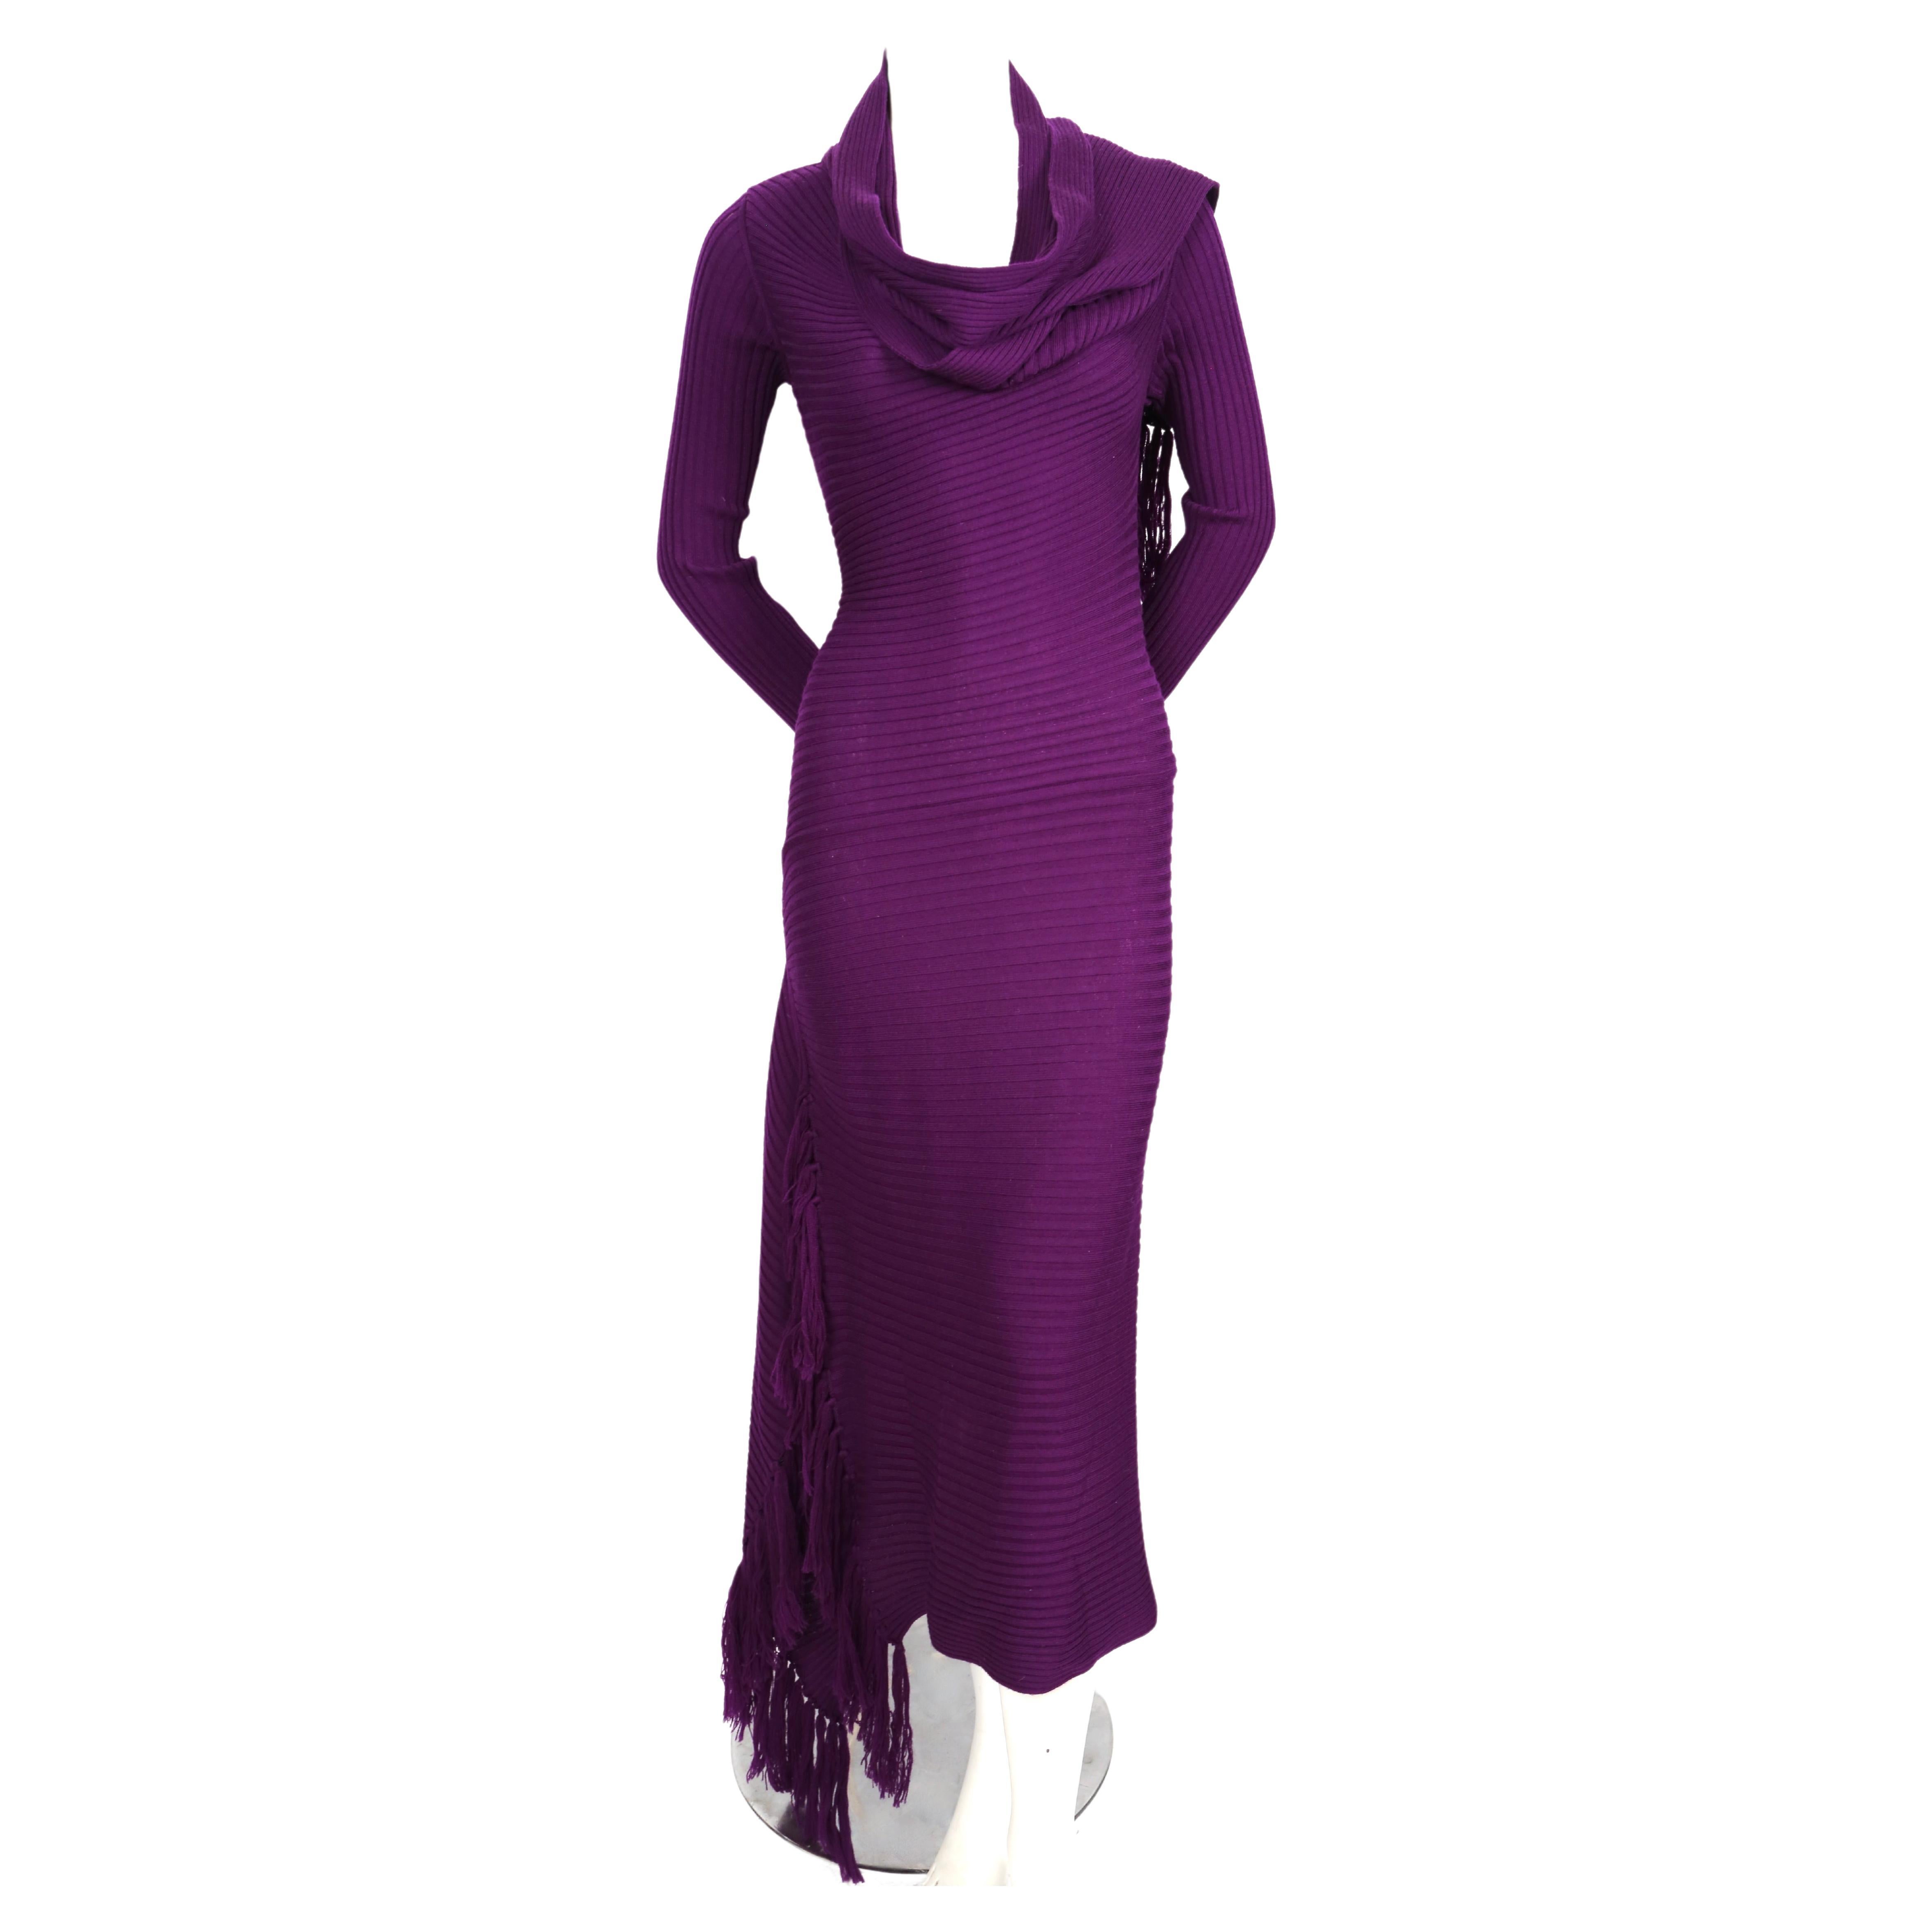 Vivid-purple, ribbed, knit dress with spiral cut and attached scarf designed by Jean Paul Gaultier dating to the late 1990's, early 2000's. Labeled a size 'M'. Approximate measurements (unstretched): bust 31-32